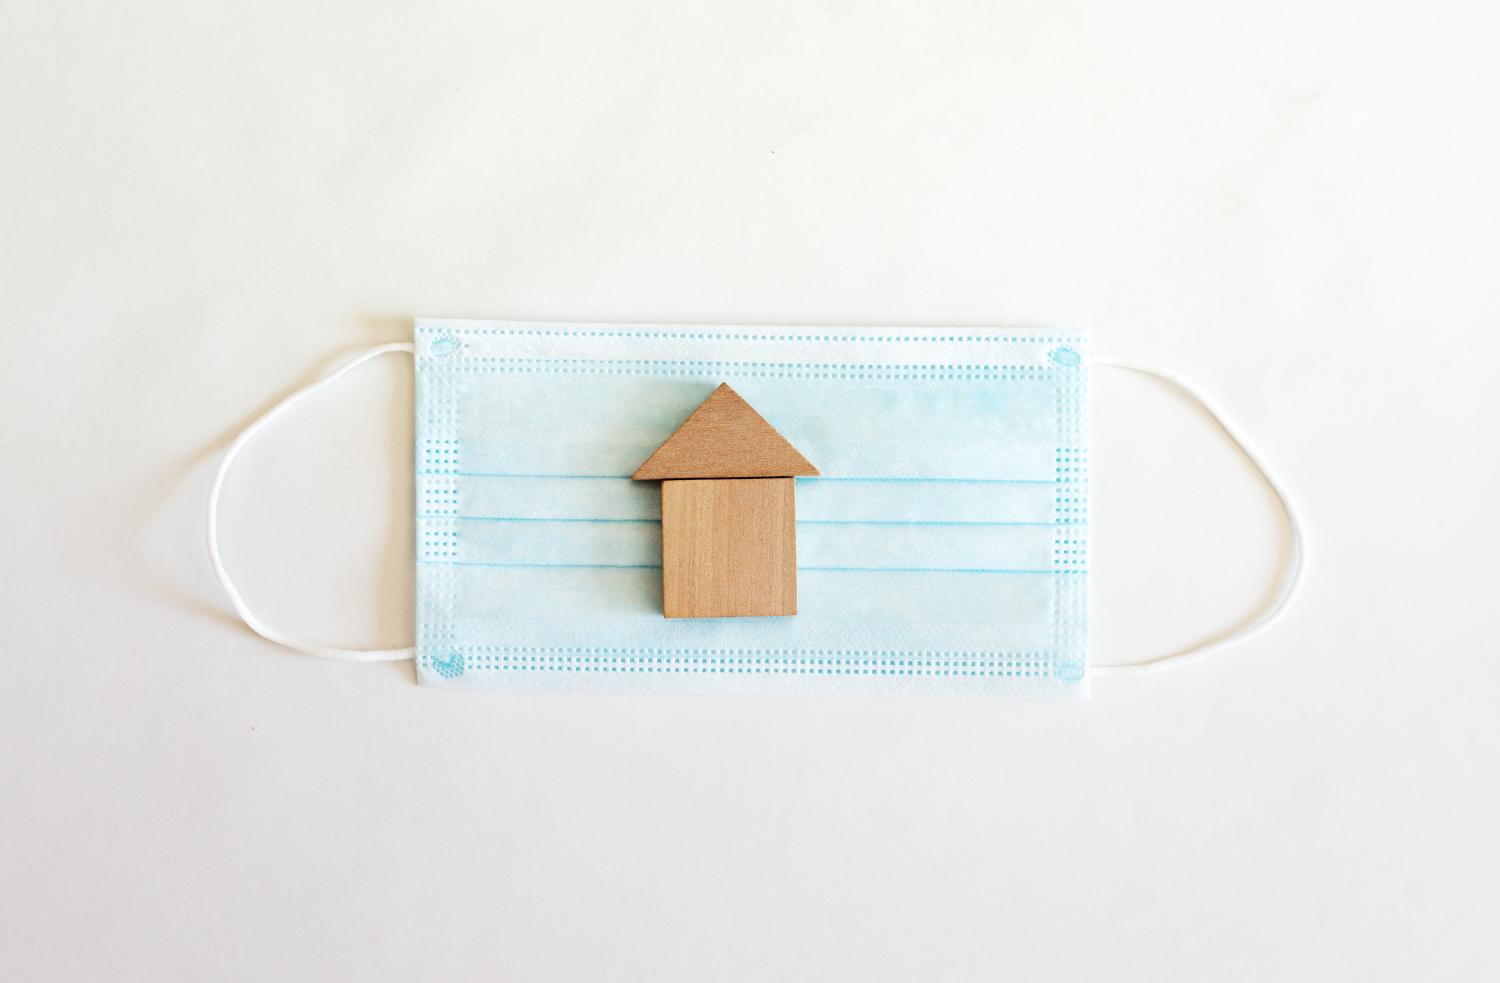 Surgical mask with a small wooden house on it.